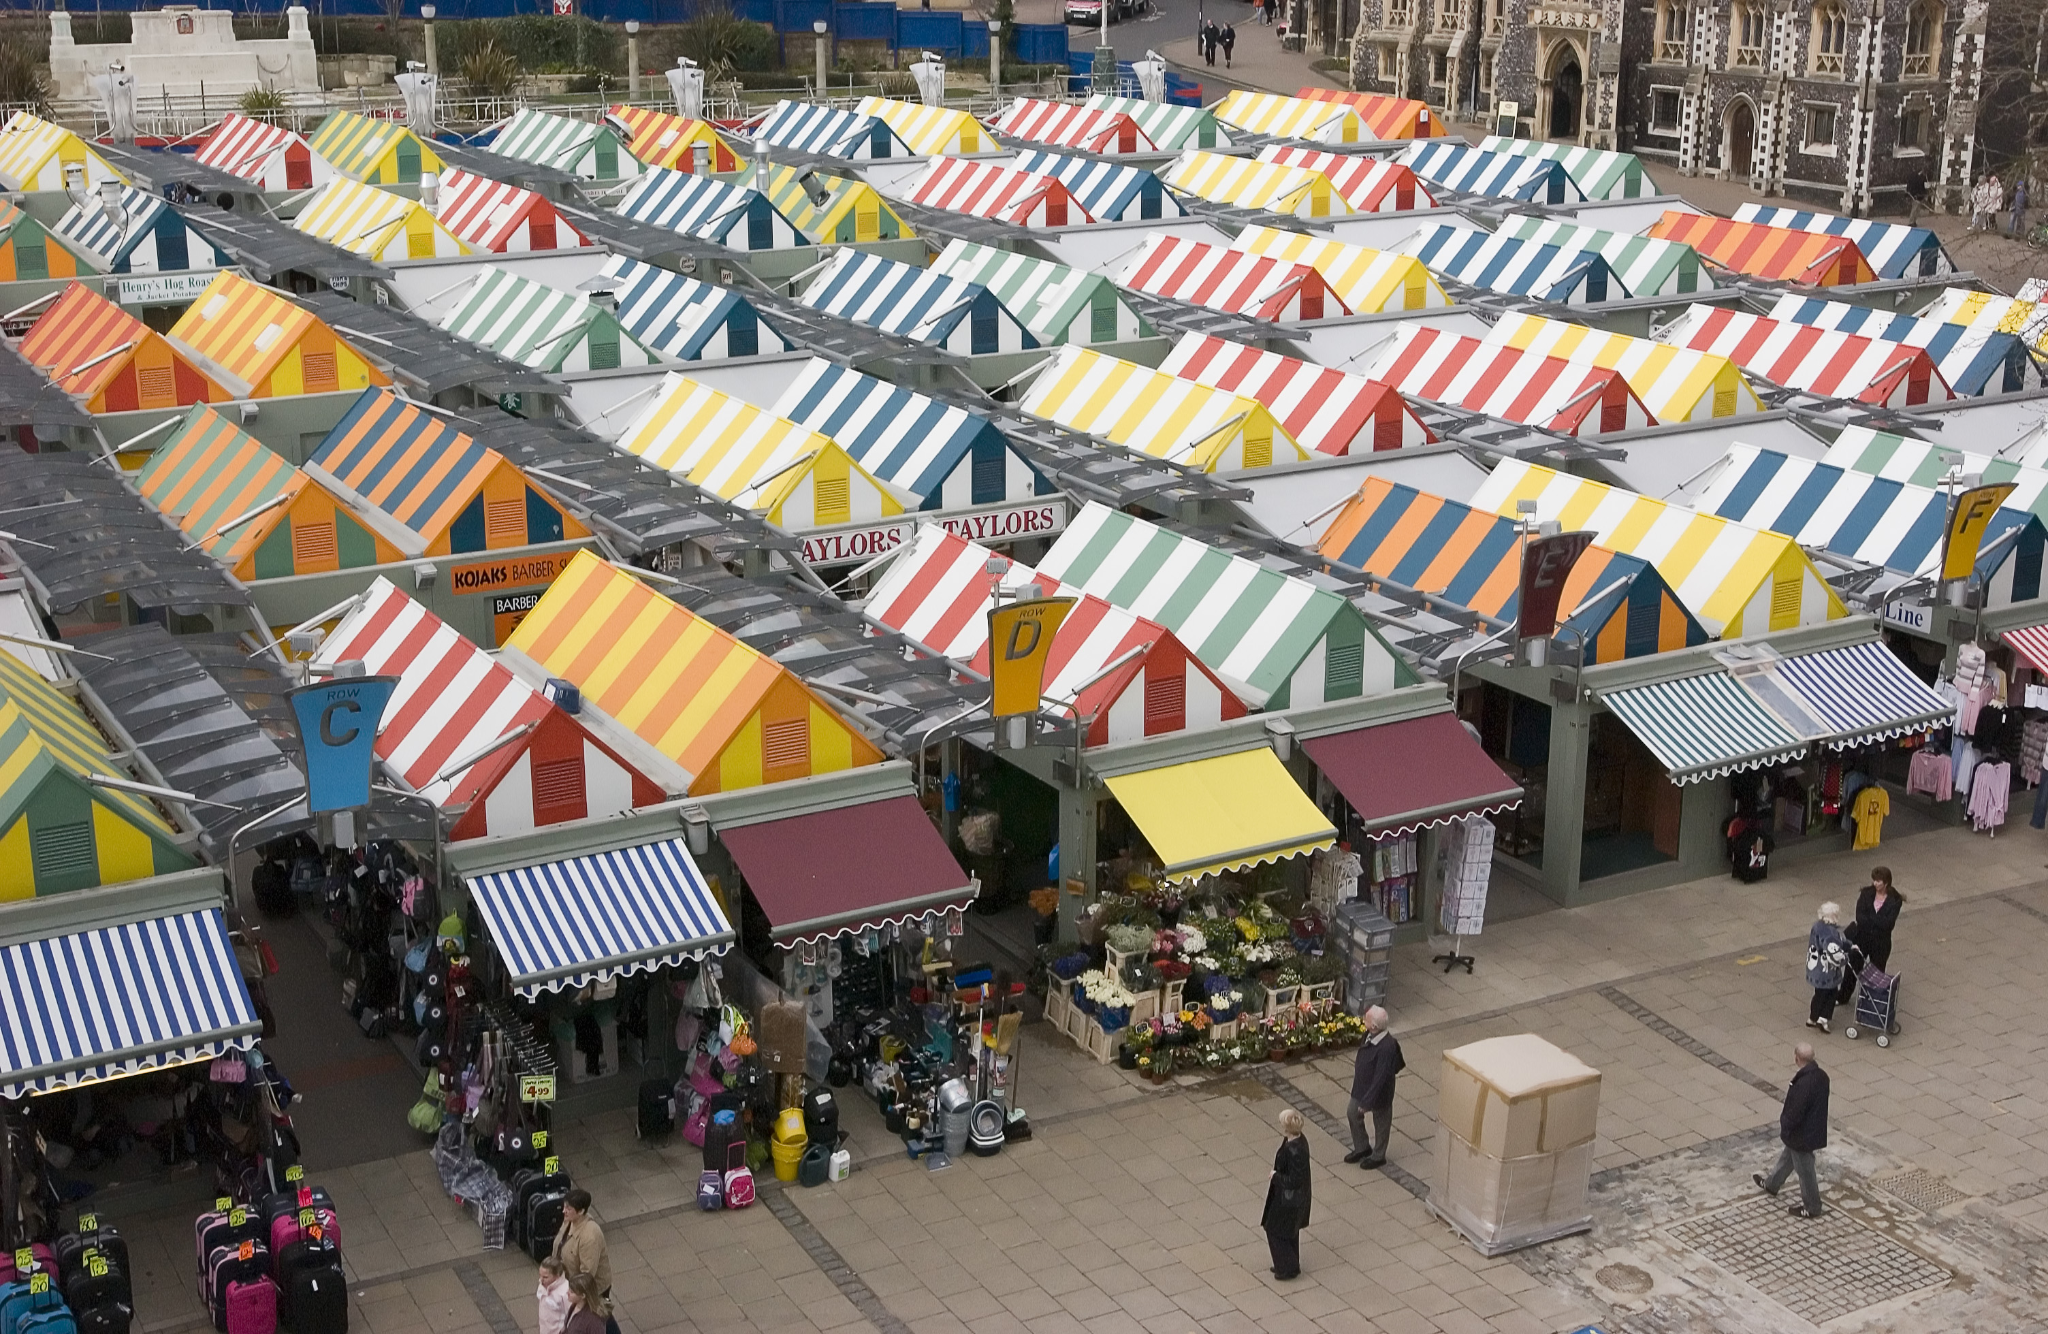 Norwich market is a lively market and has been around for decades. It's bright and offers everything from food to watch batteries